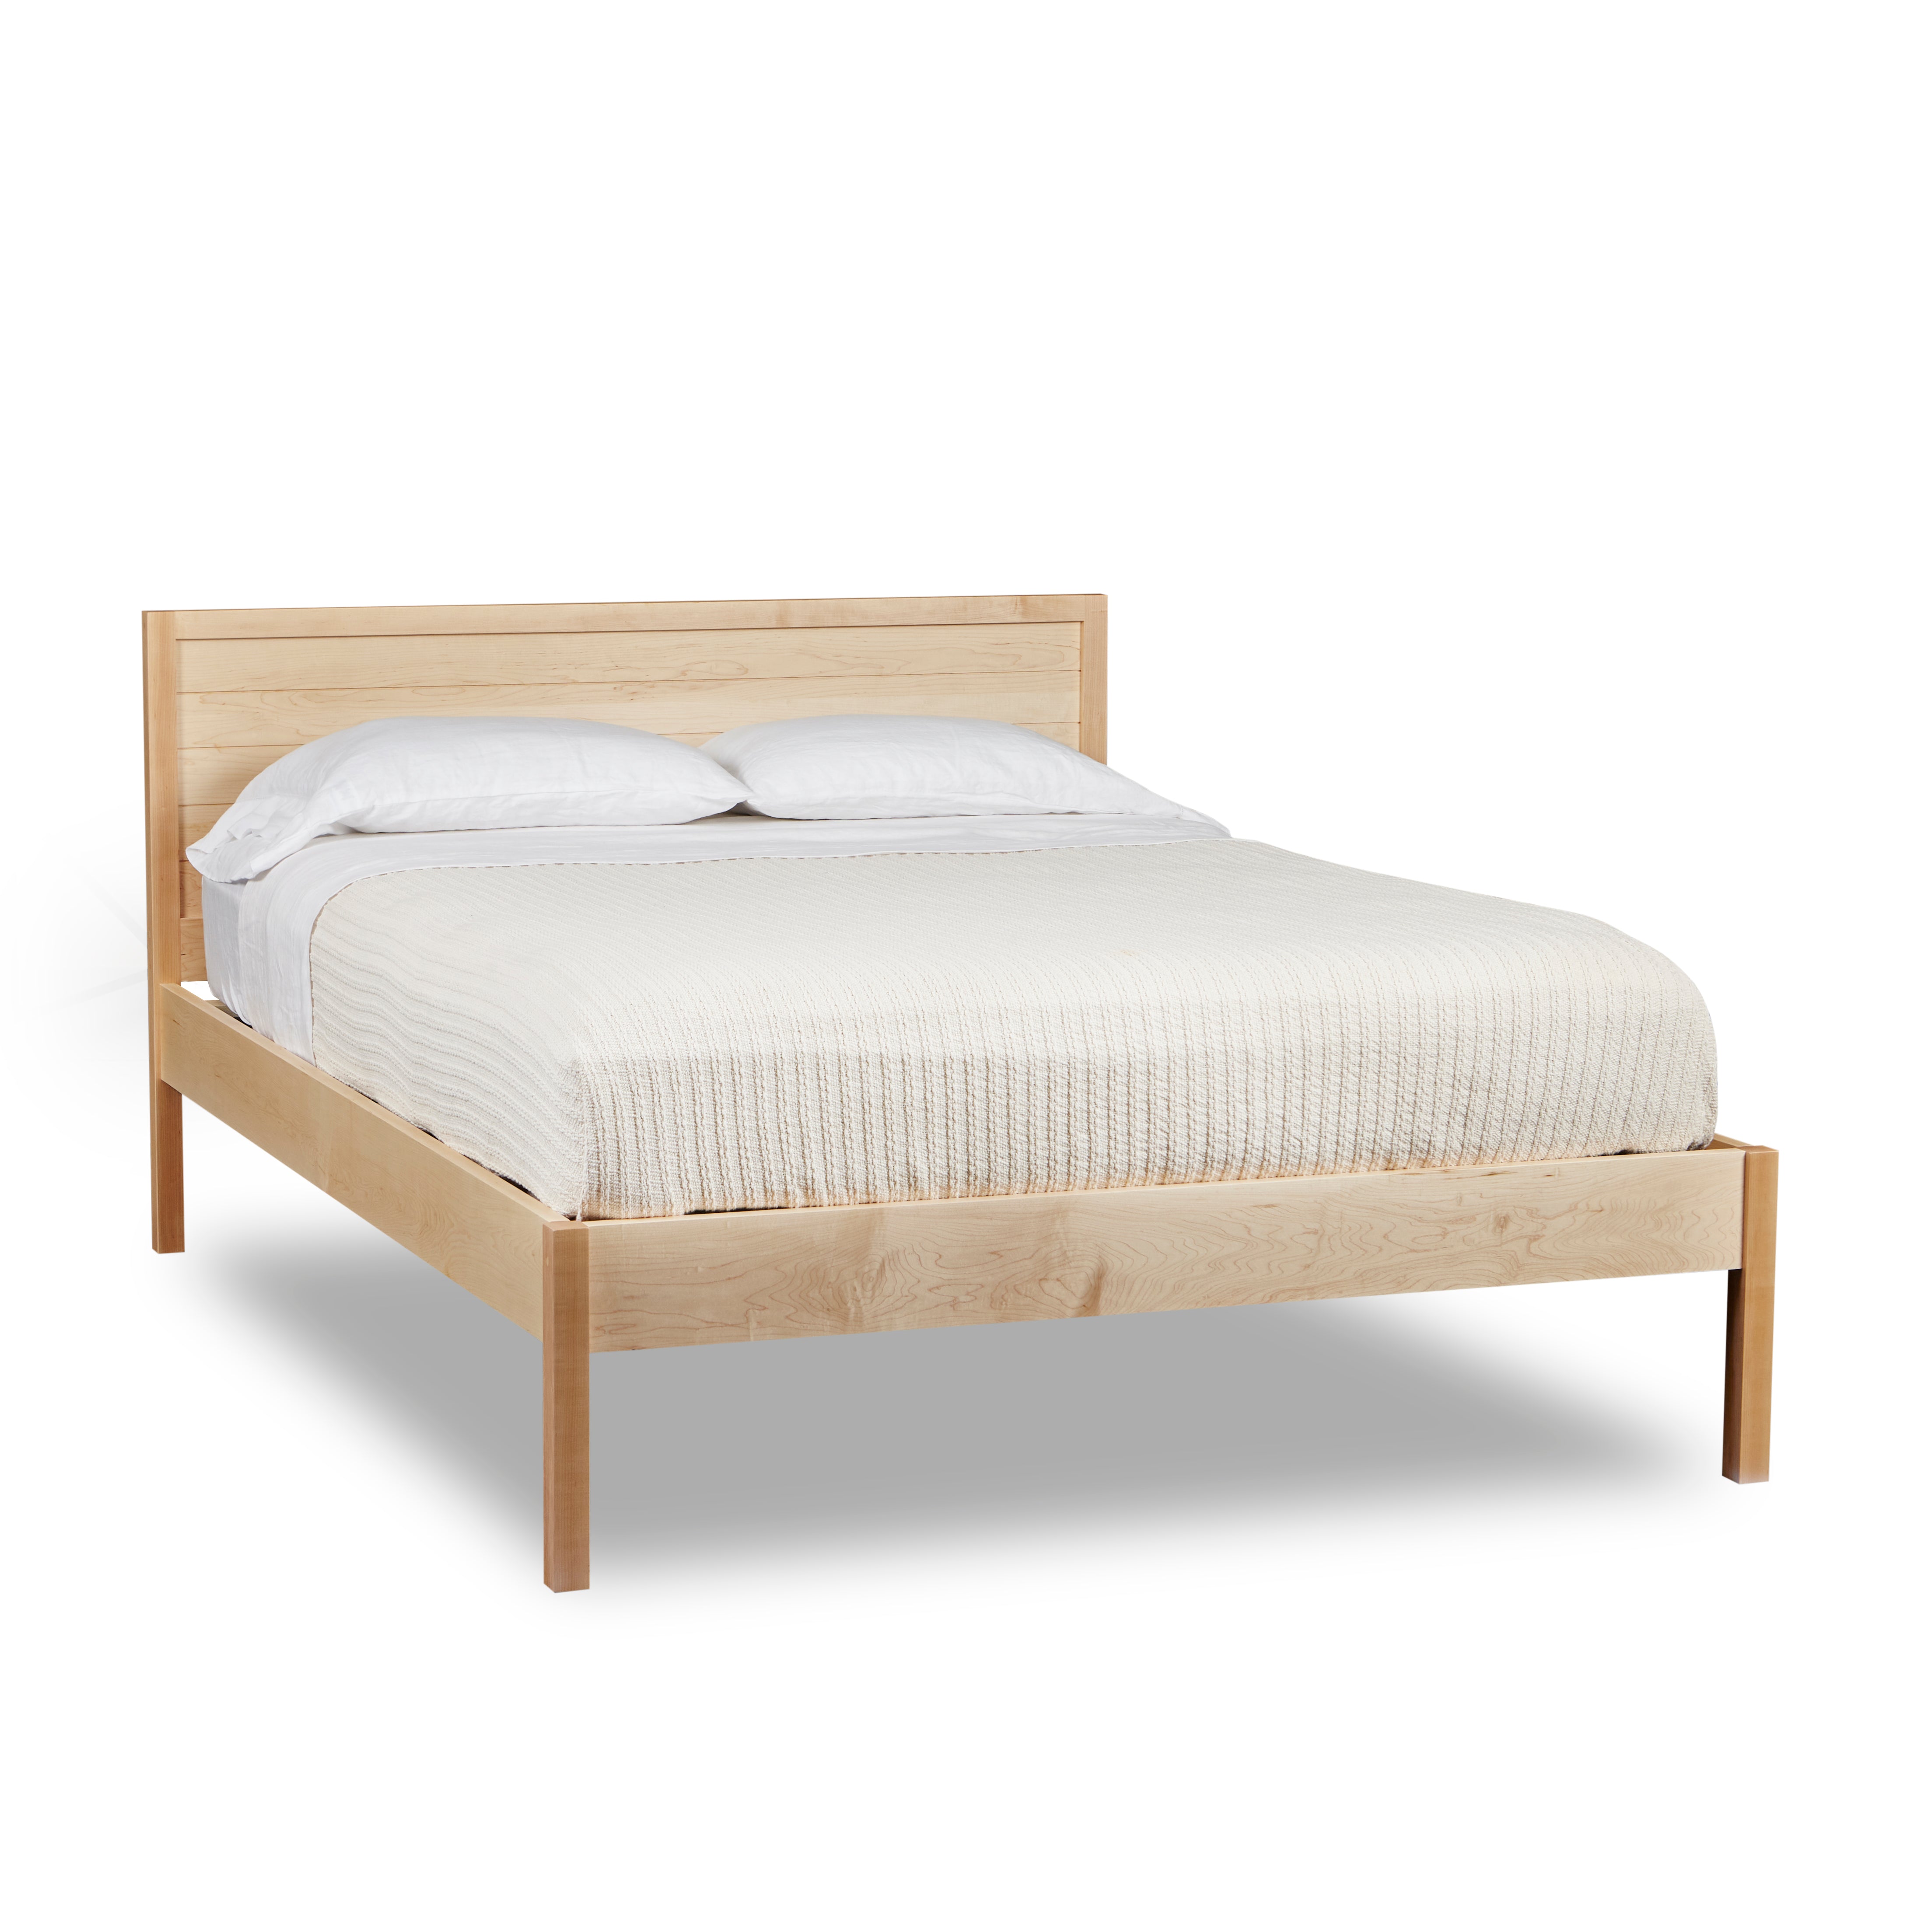 Solid maple Shiplap bed with square legs, from Maine's Chilton Furniture Co.